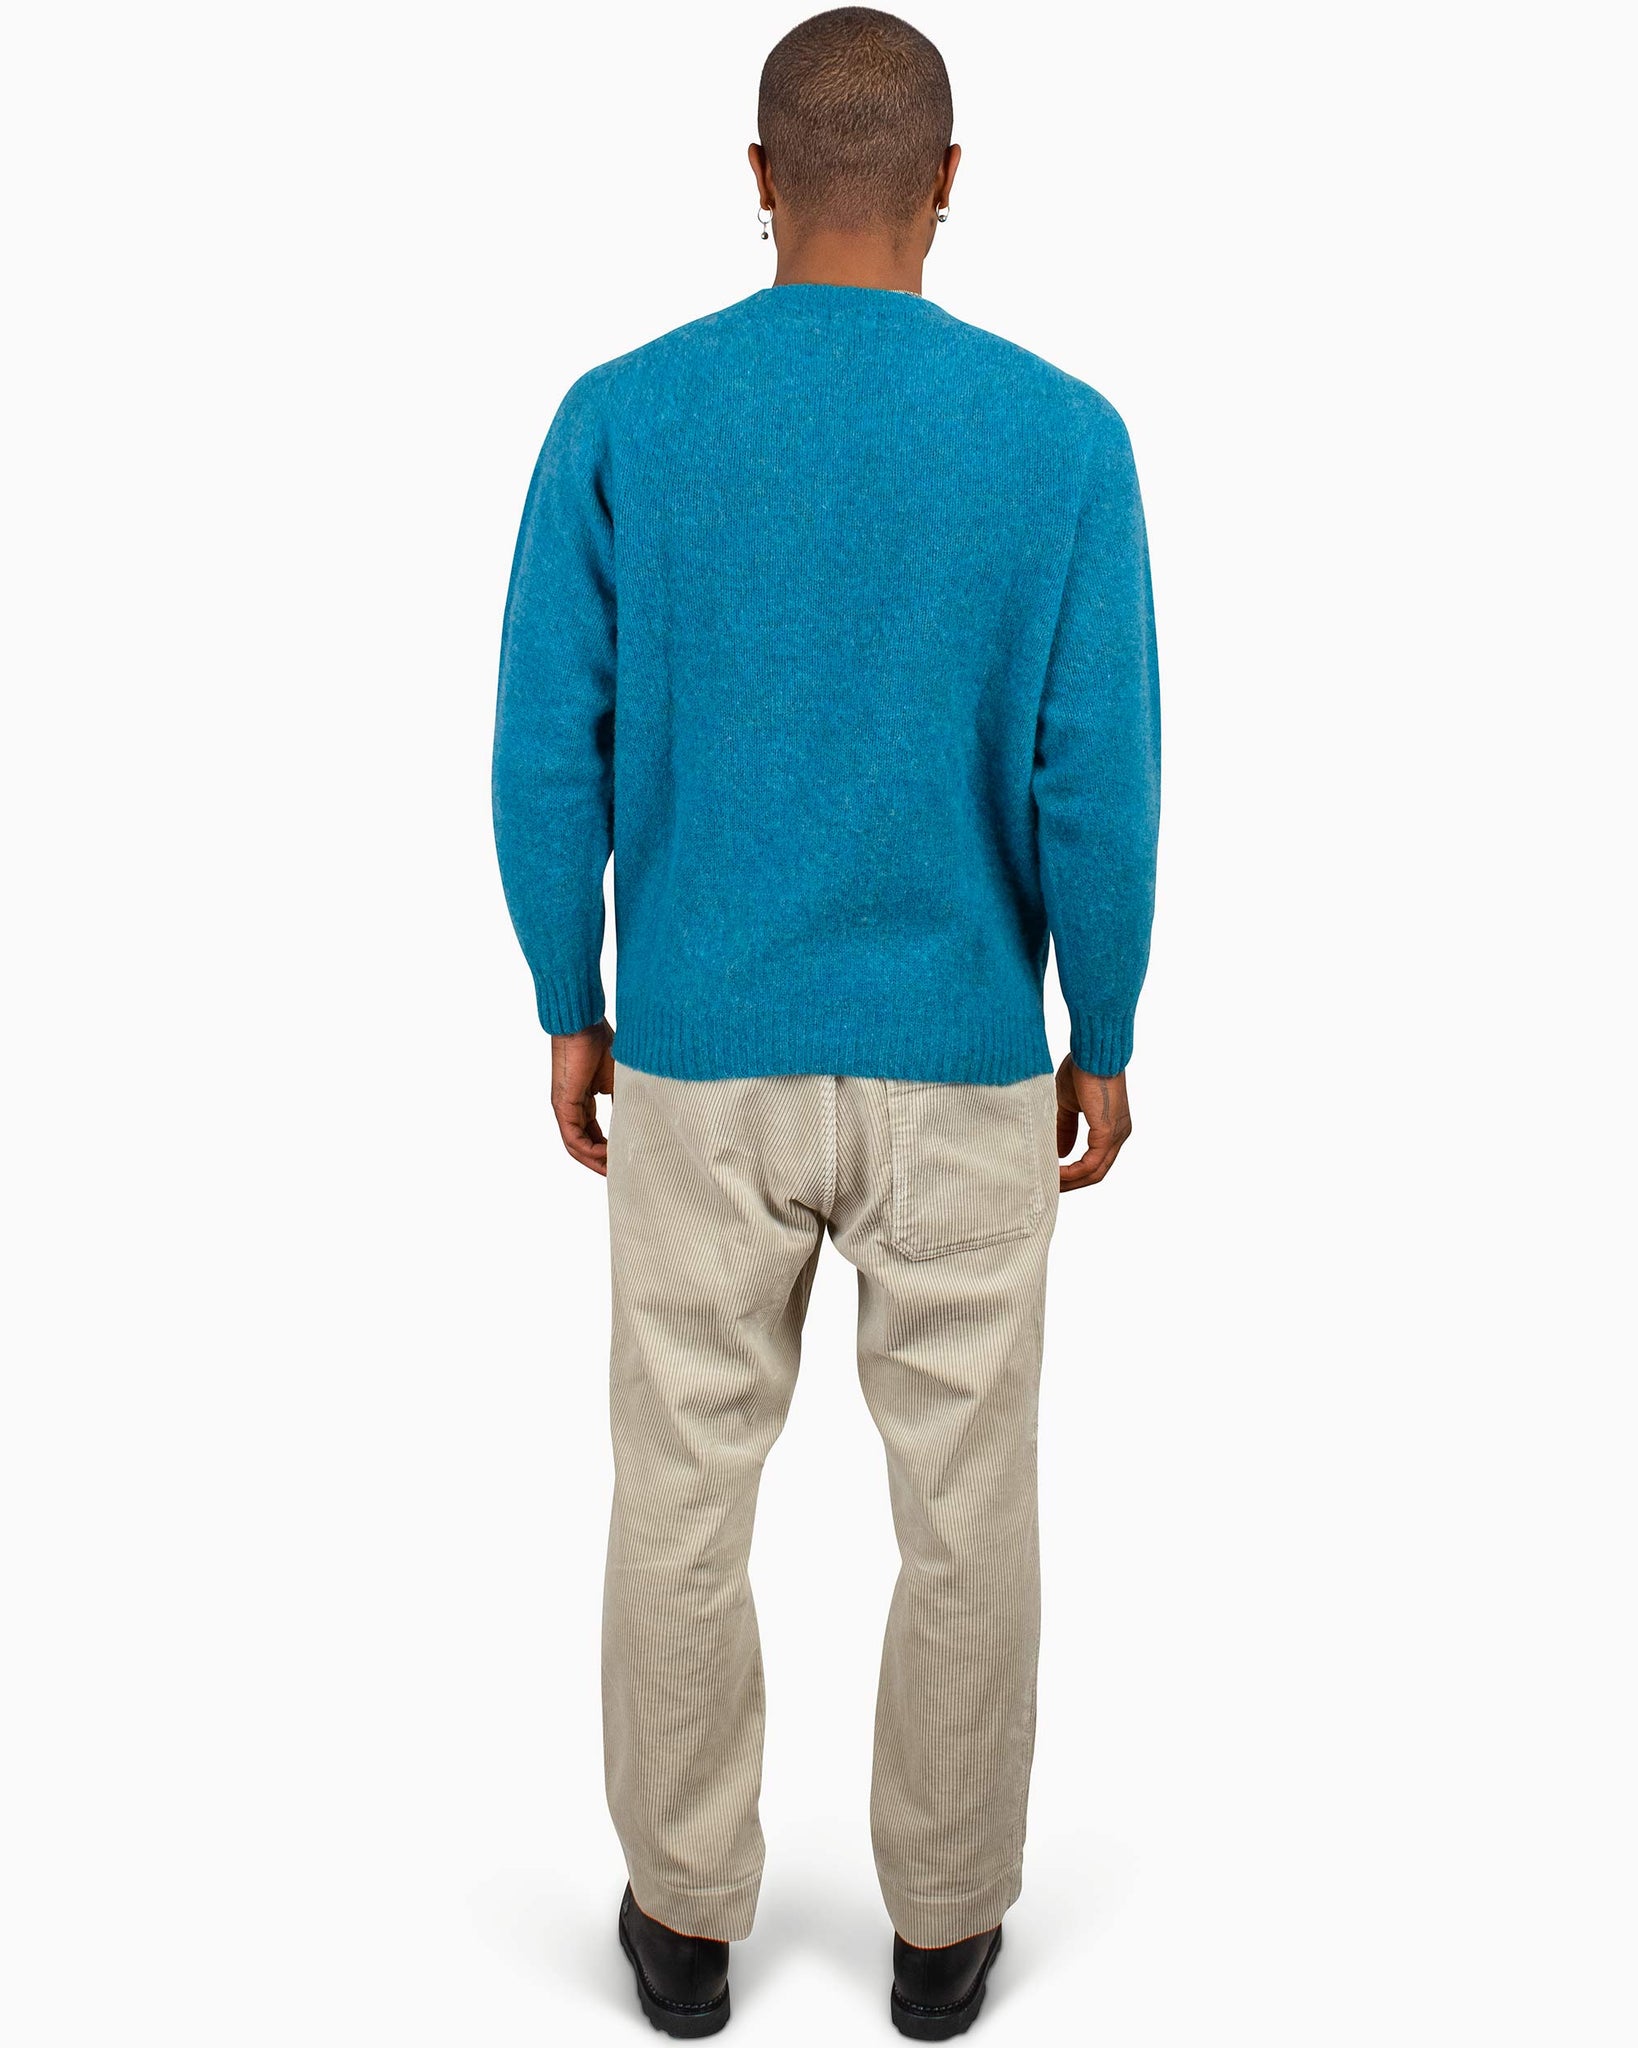 Lost & Found Shaggy Sweater Azure Back